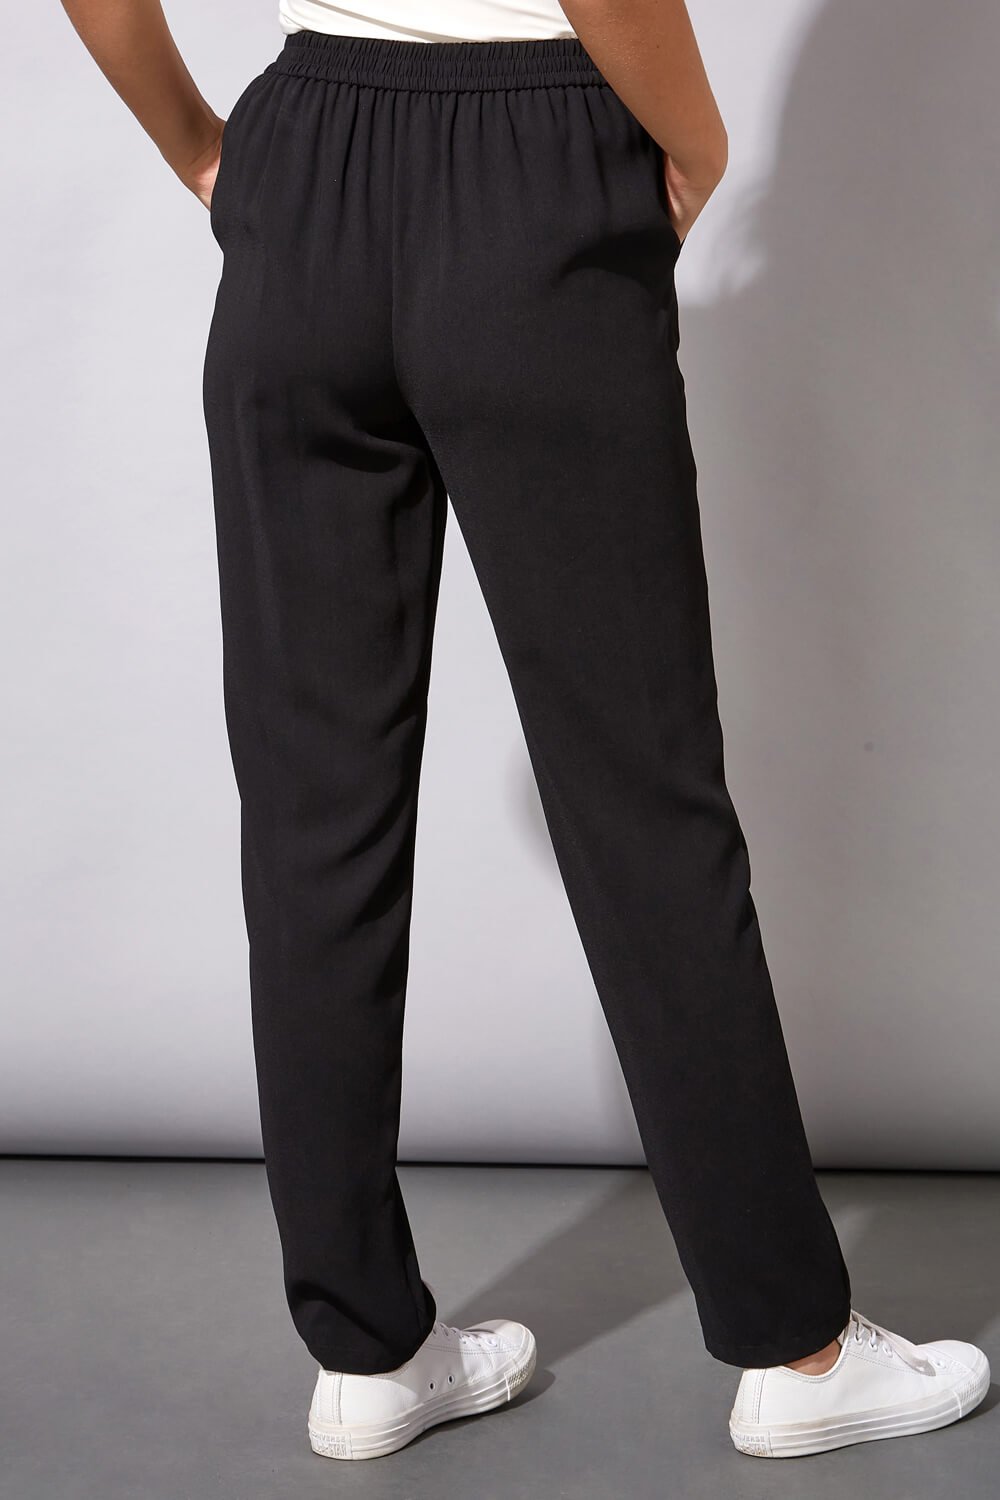 Black 29 Inch Tie Front Jogger, Image 2 of 4